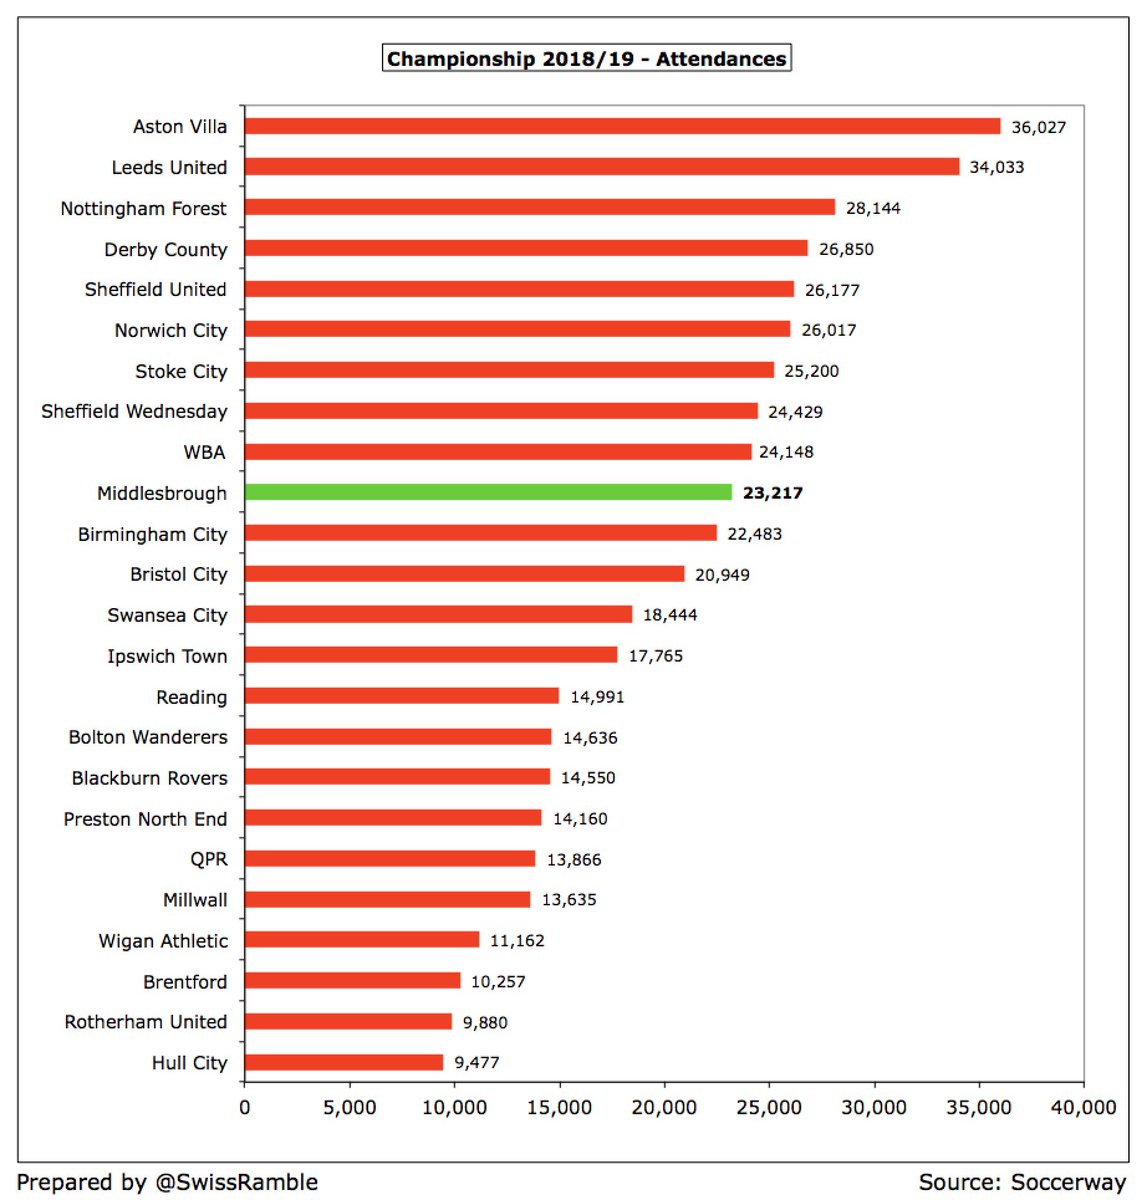  #Boro attendance of 23,217 was the 10th highest in the Championship, as some traditional big clubs led the way, e.g.  #AVFC 36,027 and  #LUFC 34,033. Ticket prices were frozen in 2018/19, but there was a small increase in 2019/20 (only the second rise in 15 years at the Riverside).